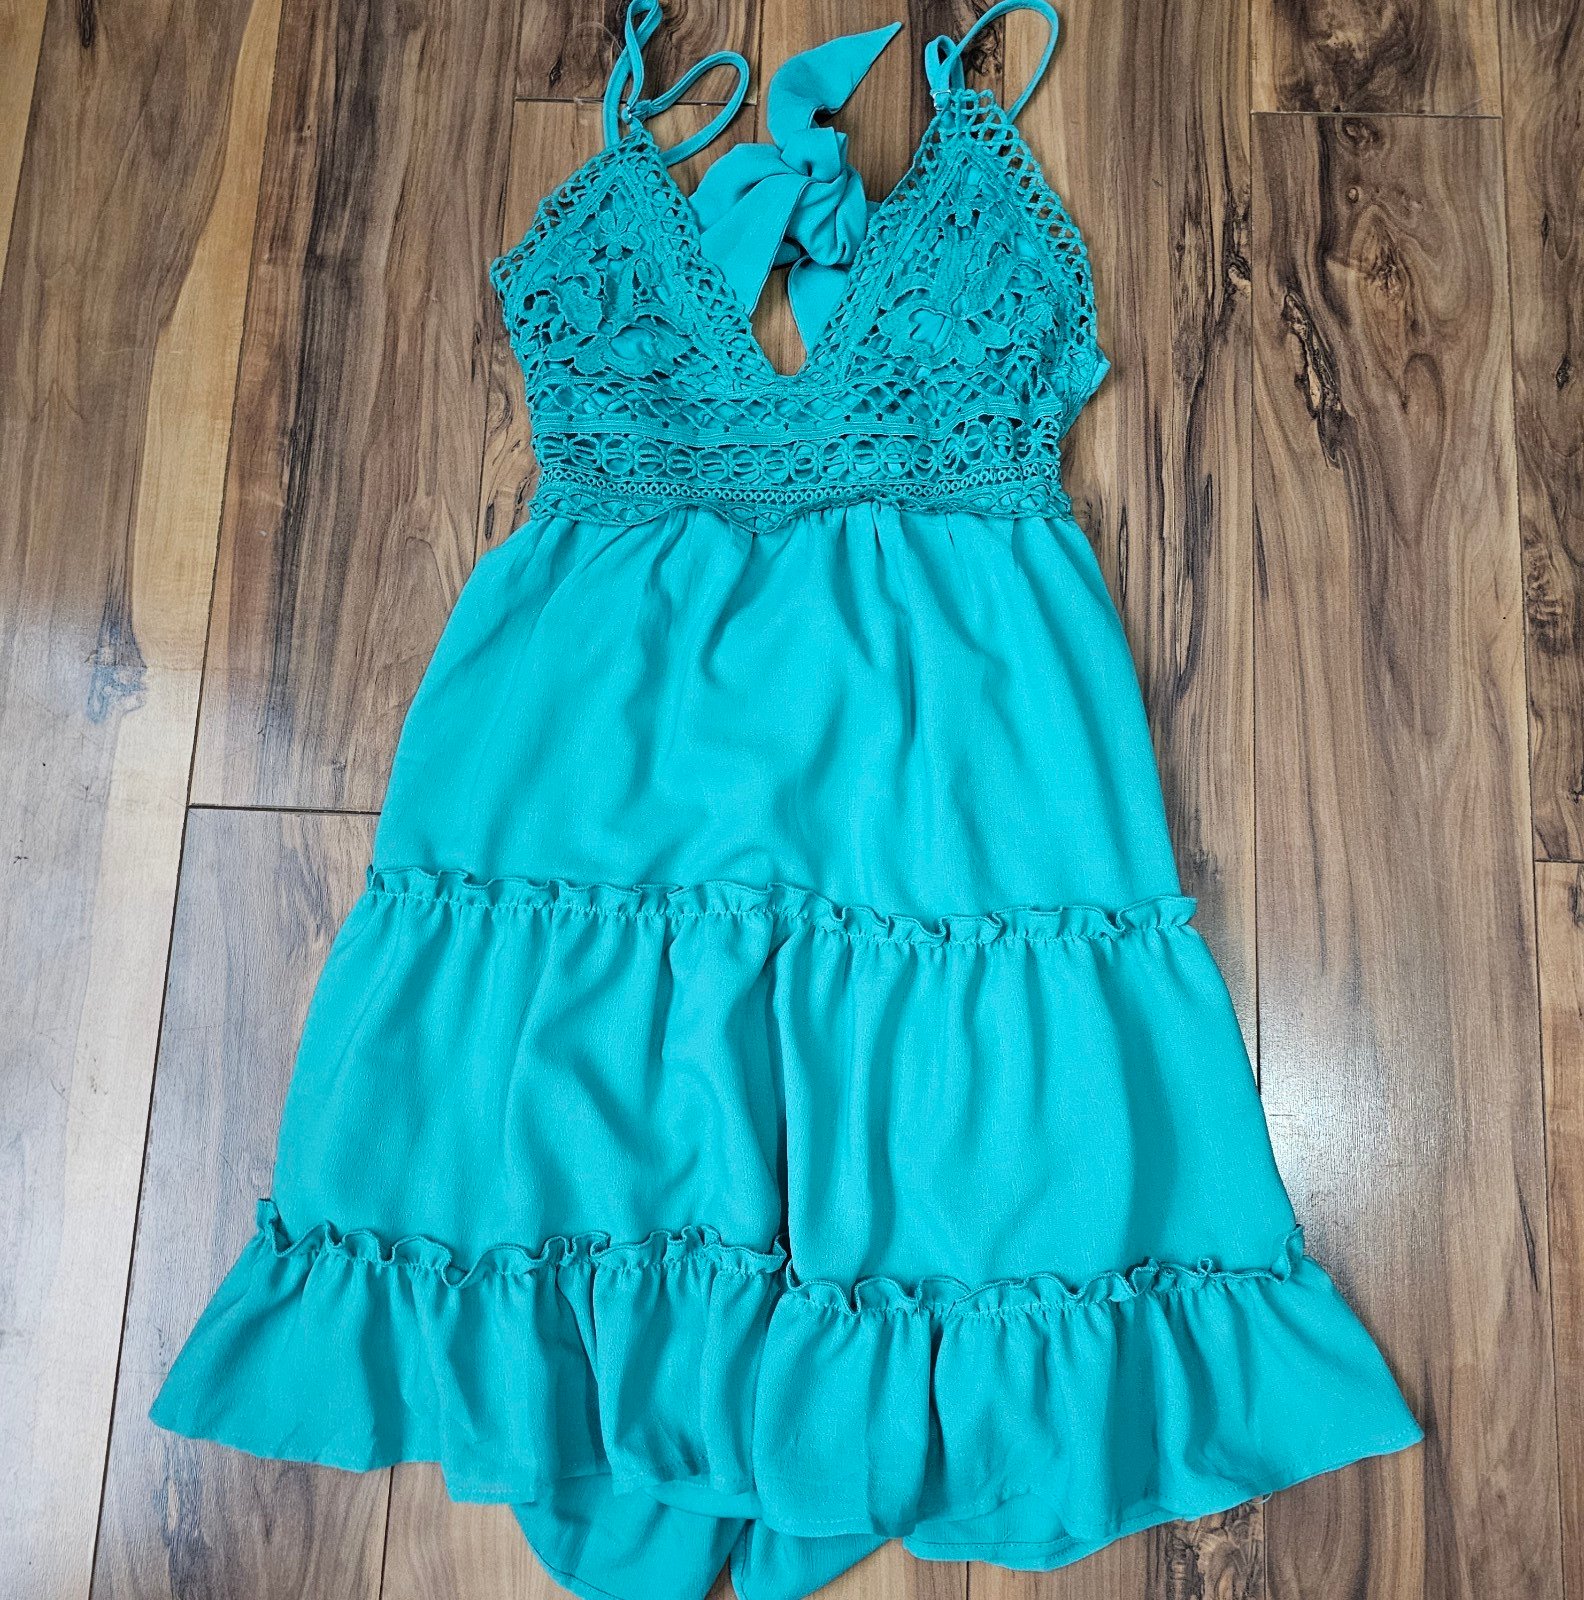 Boho Summer Dress Available By Angela Turquoise size small g2EnGdQm5